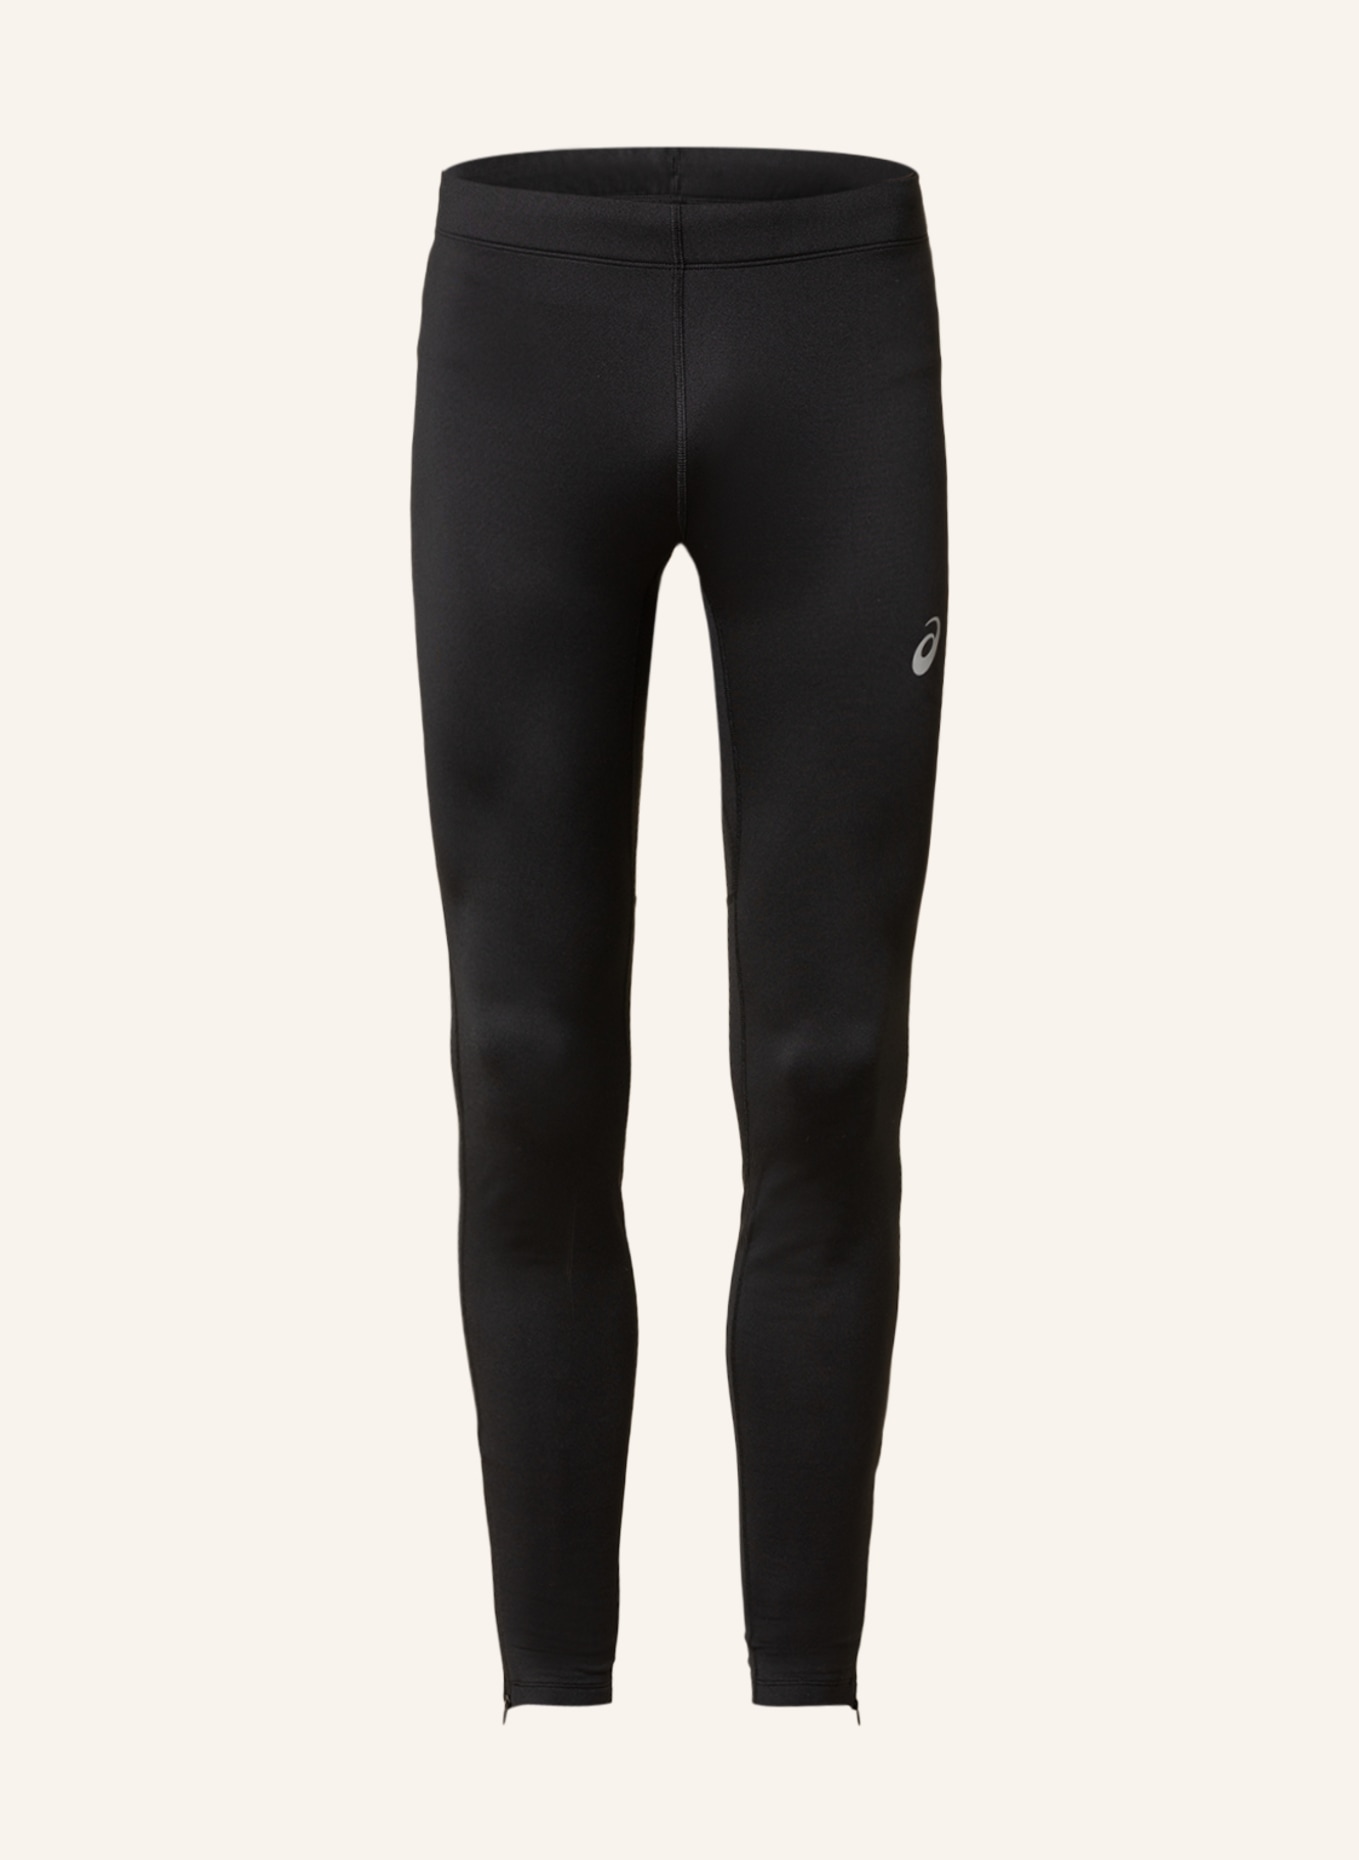 in TIGHT WINTER ASICS trousers black CORE Running